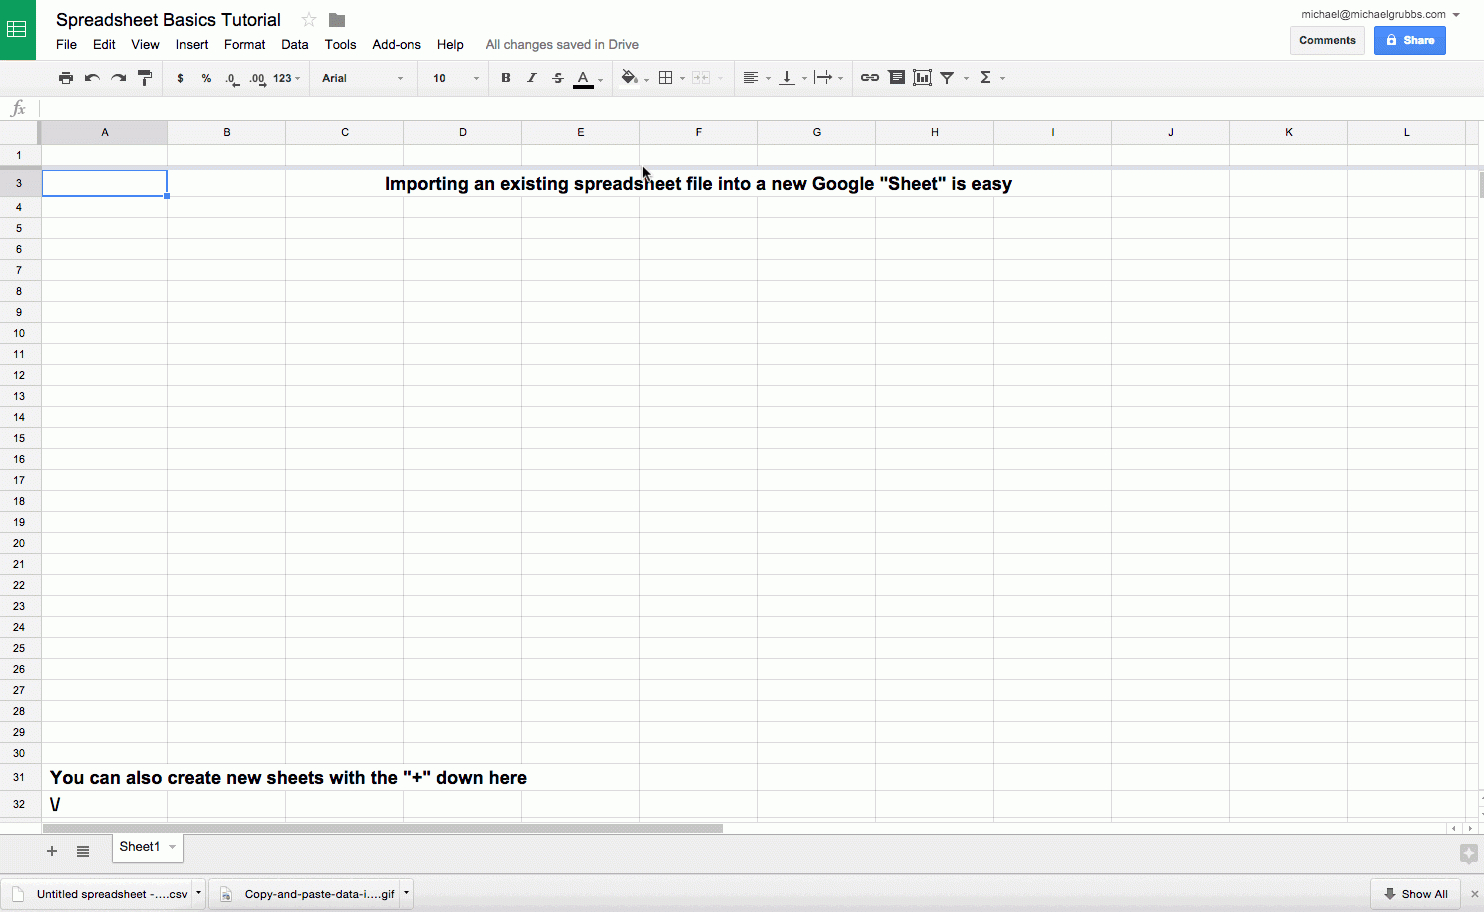 How To Do A Google Spreadsheet With Google Sheets 101: The Beginner's Guide To Online Spreadsheets  The